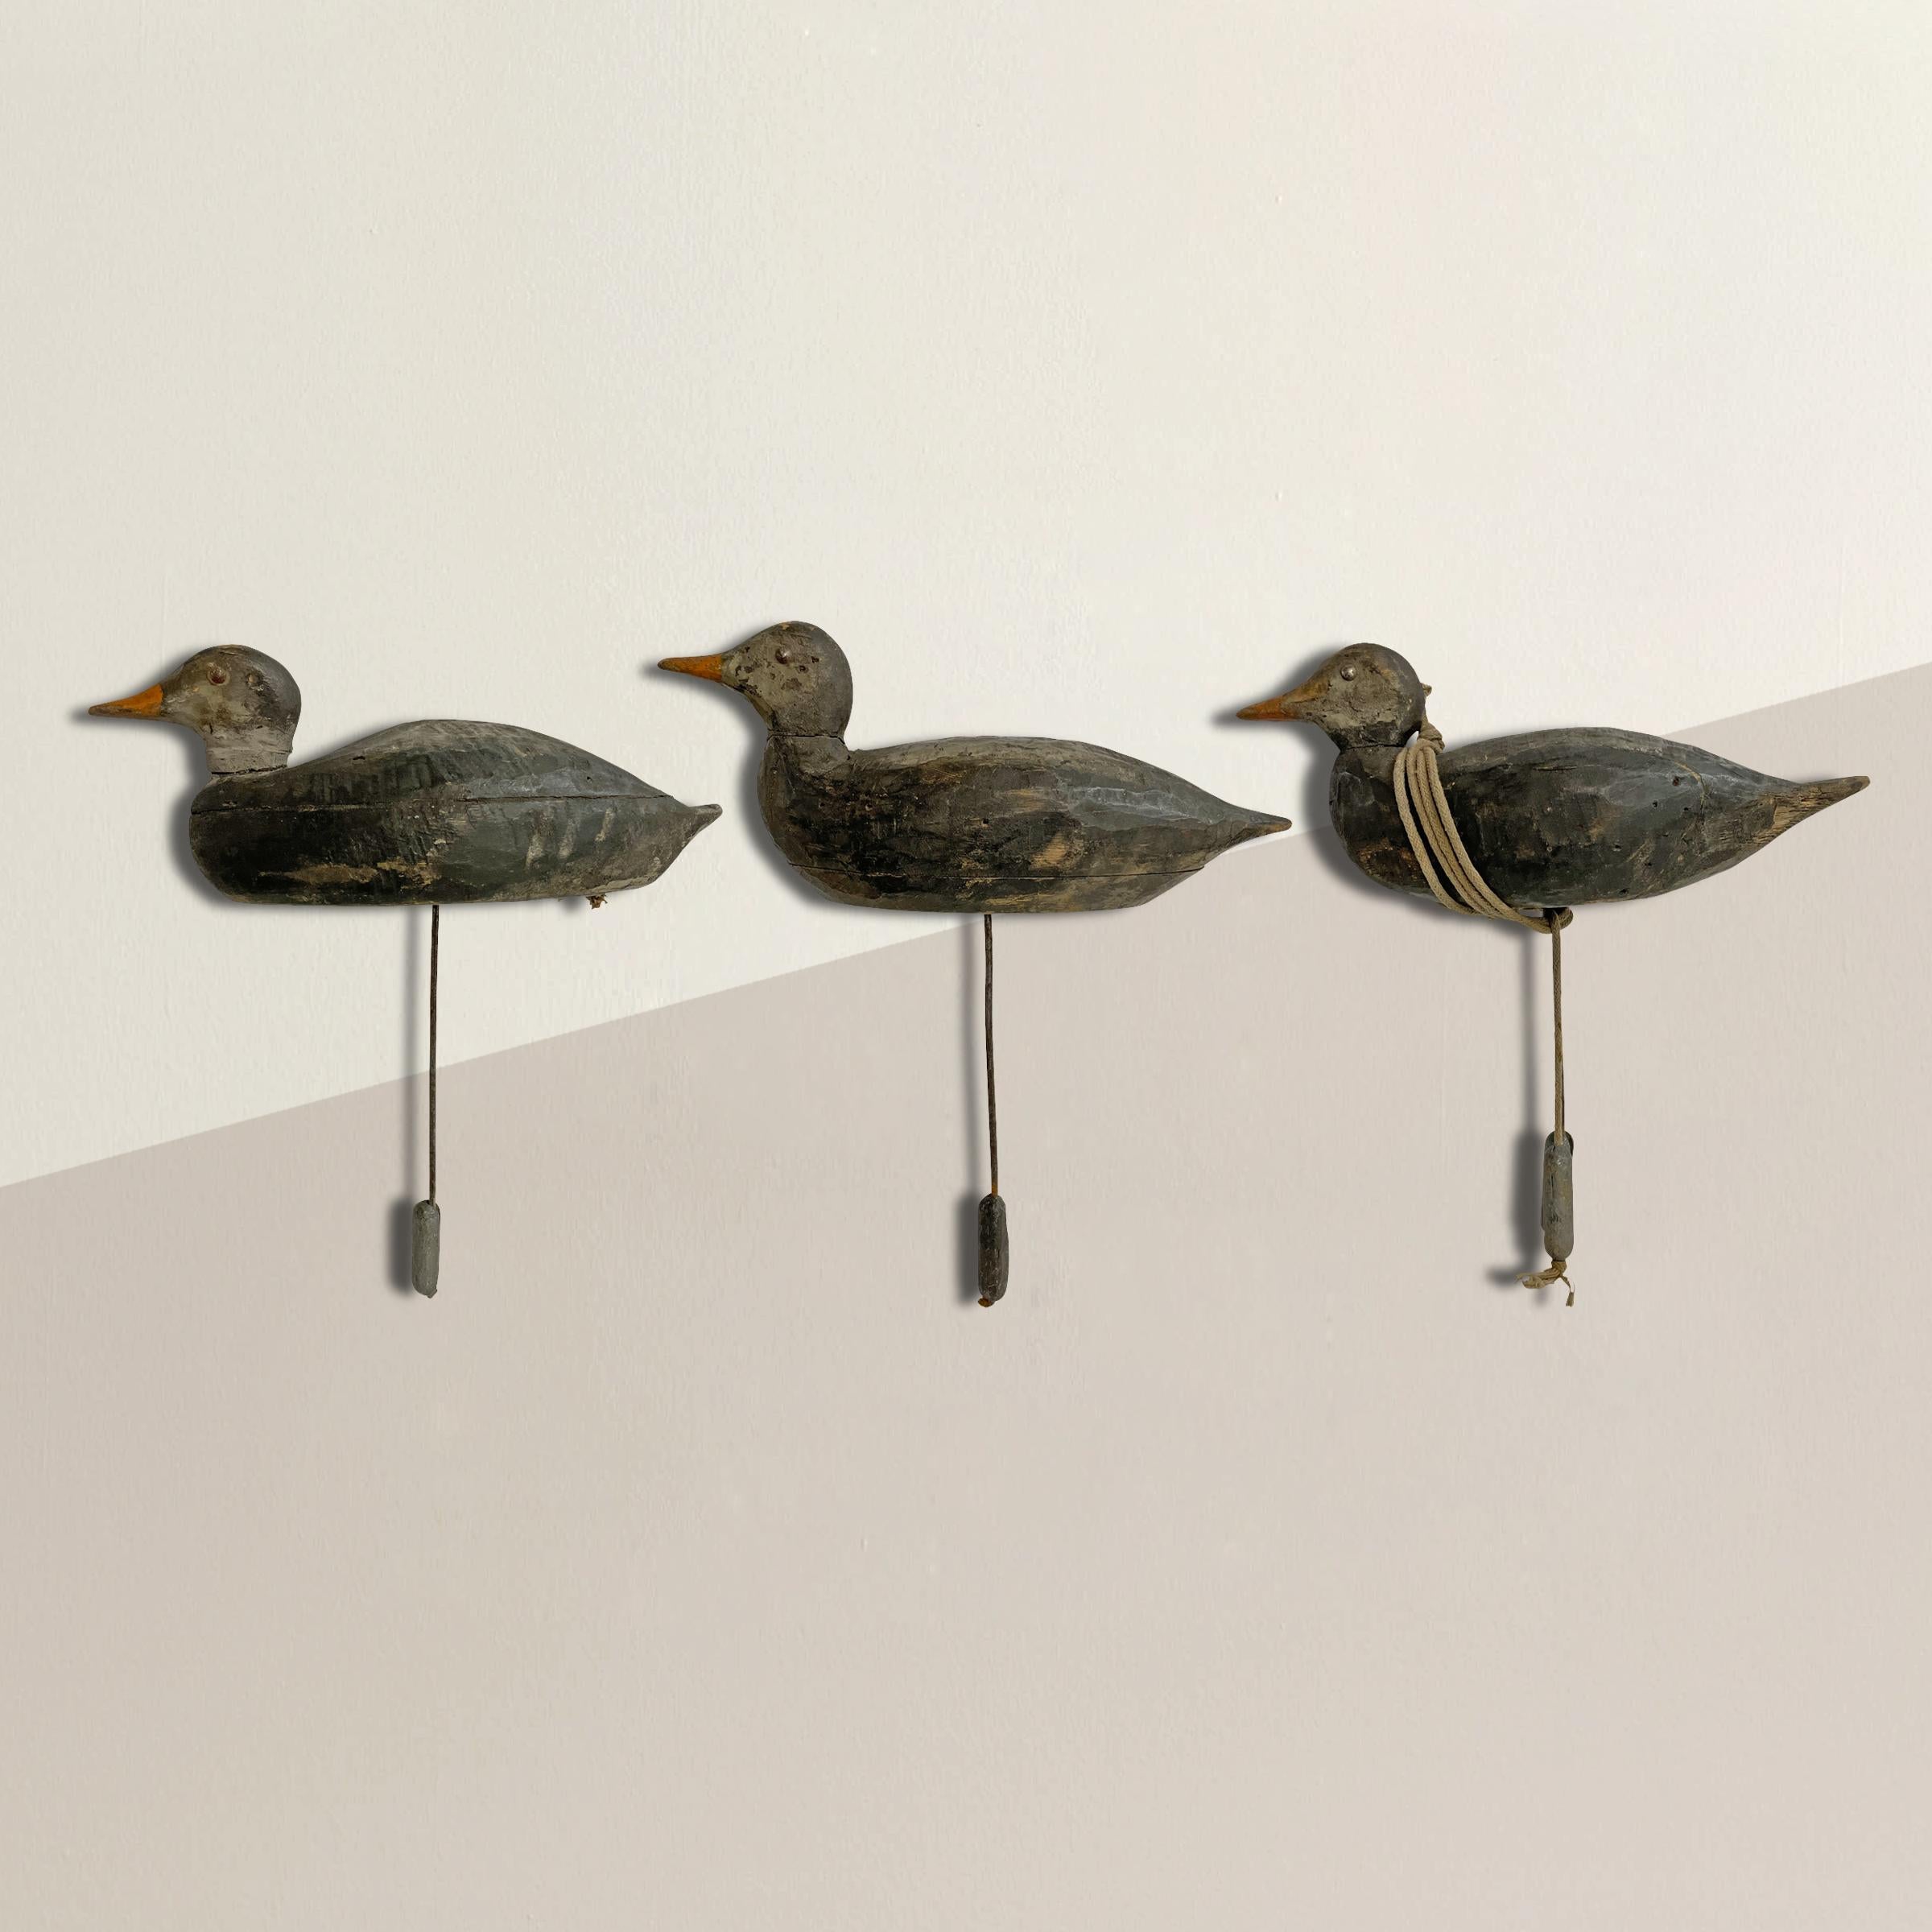 A set of three charing early 20th century American hand-carved wood duck decoys with their original lead weights, one with the rope still wrapped around it, and all with custom wall mounts so they can be displayed facing right or left.